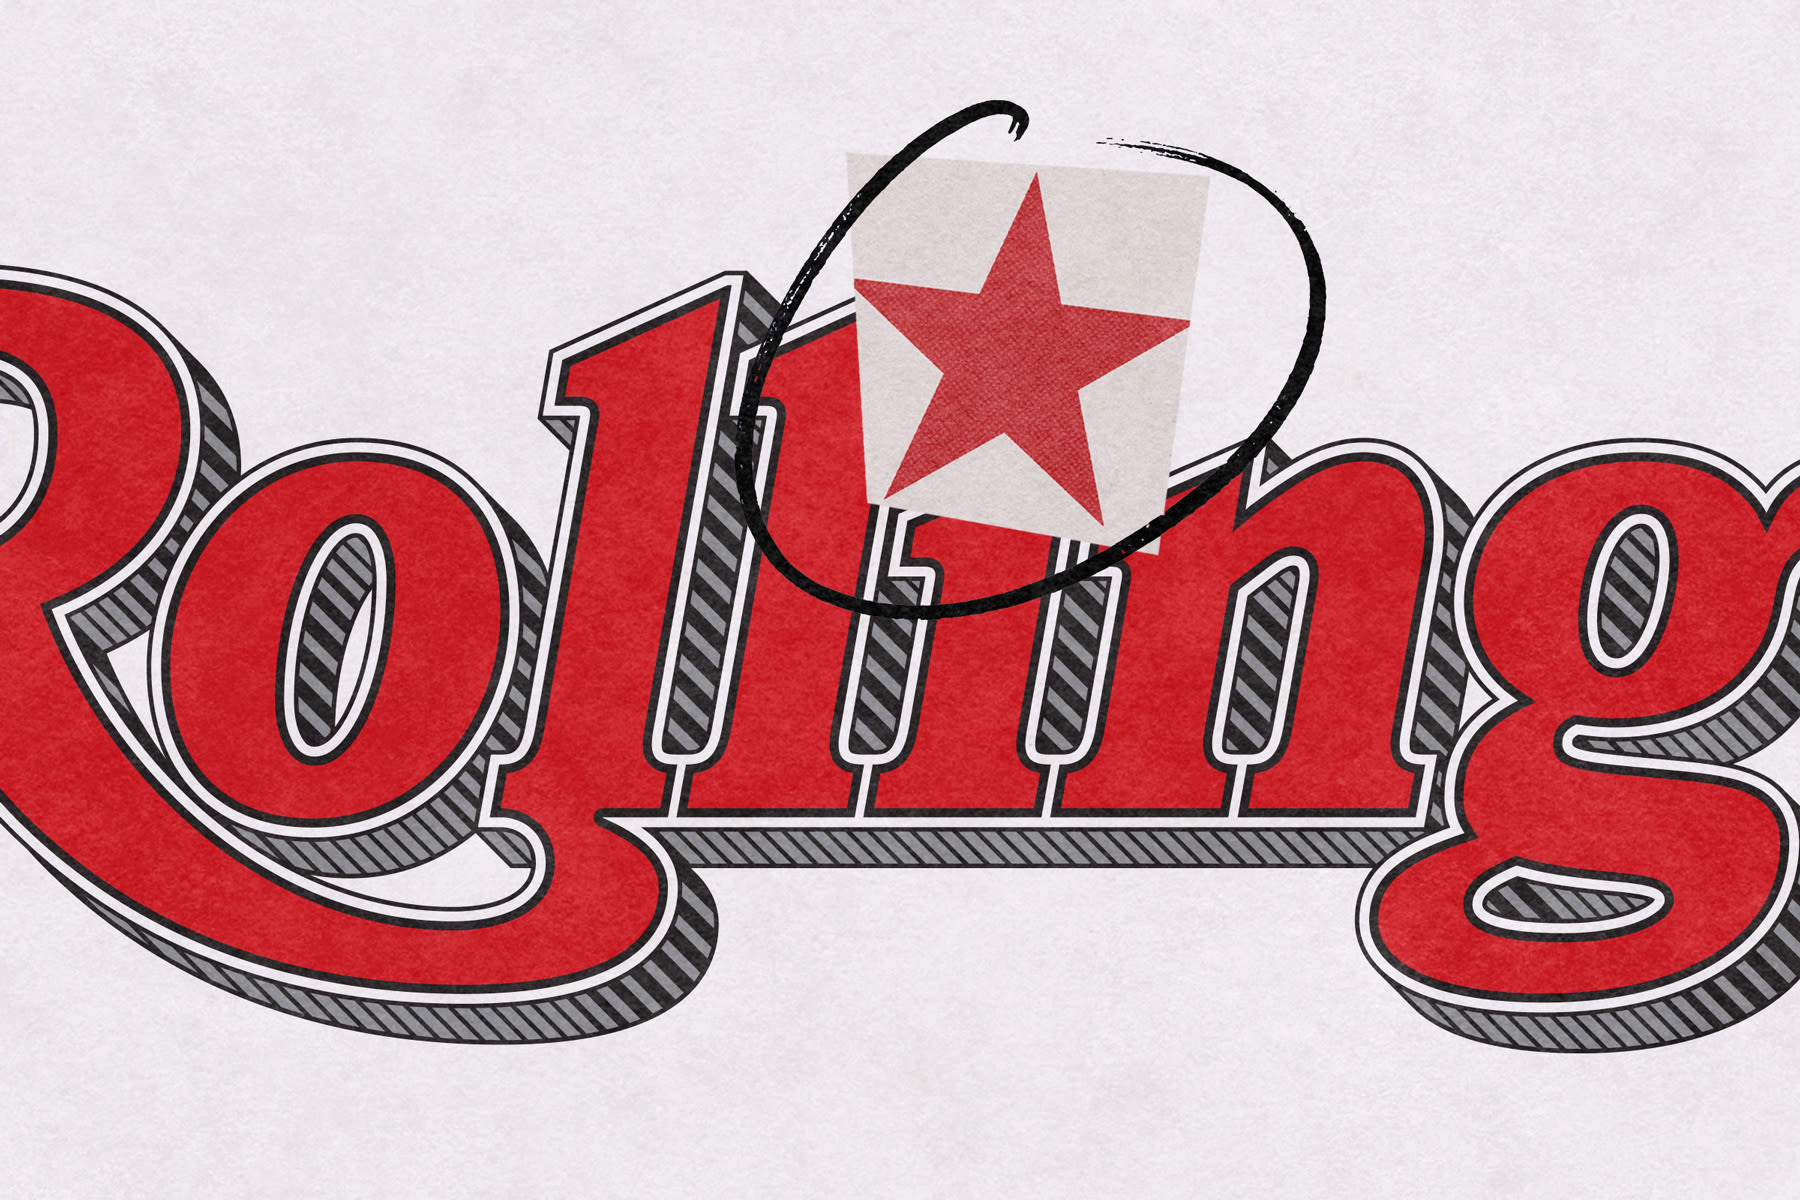 Rolling Stone Has a New Album Rating System. It’s the Old Rolling Stone Album Rating System